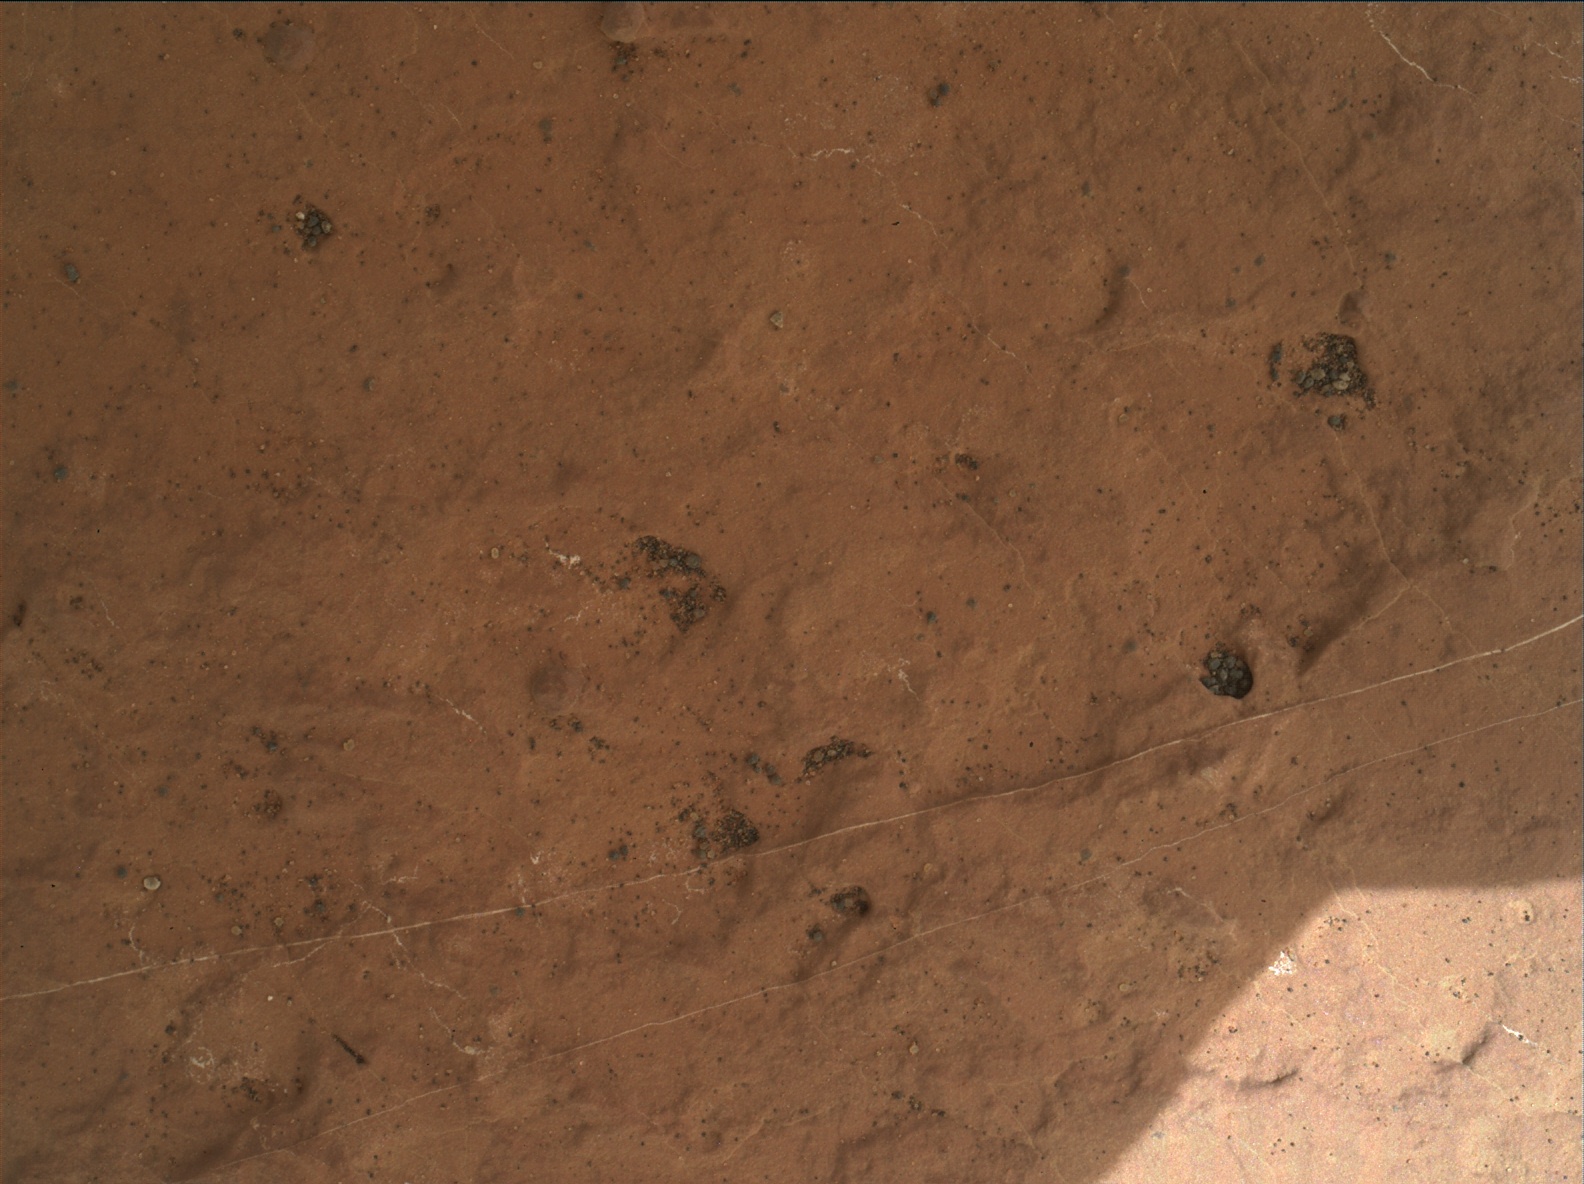 Nasa's Mars rover Curiosity acquired this image using its Mars Hand Lens Imager (MAHLI) on Sol 1591